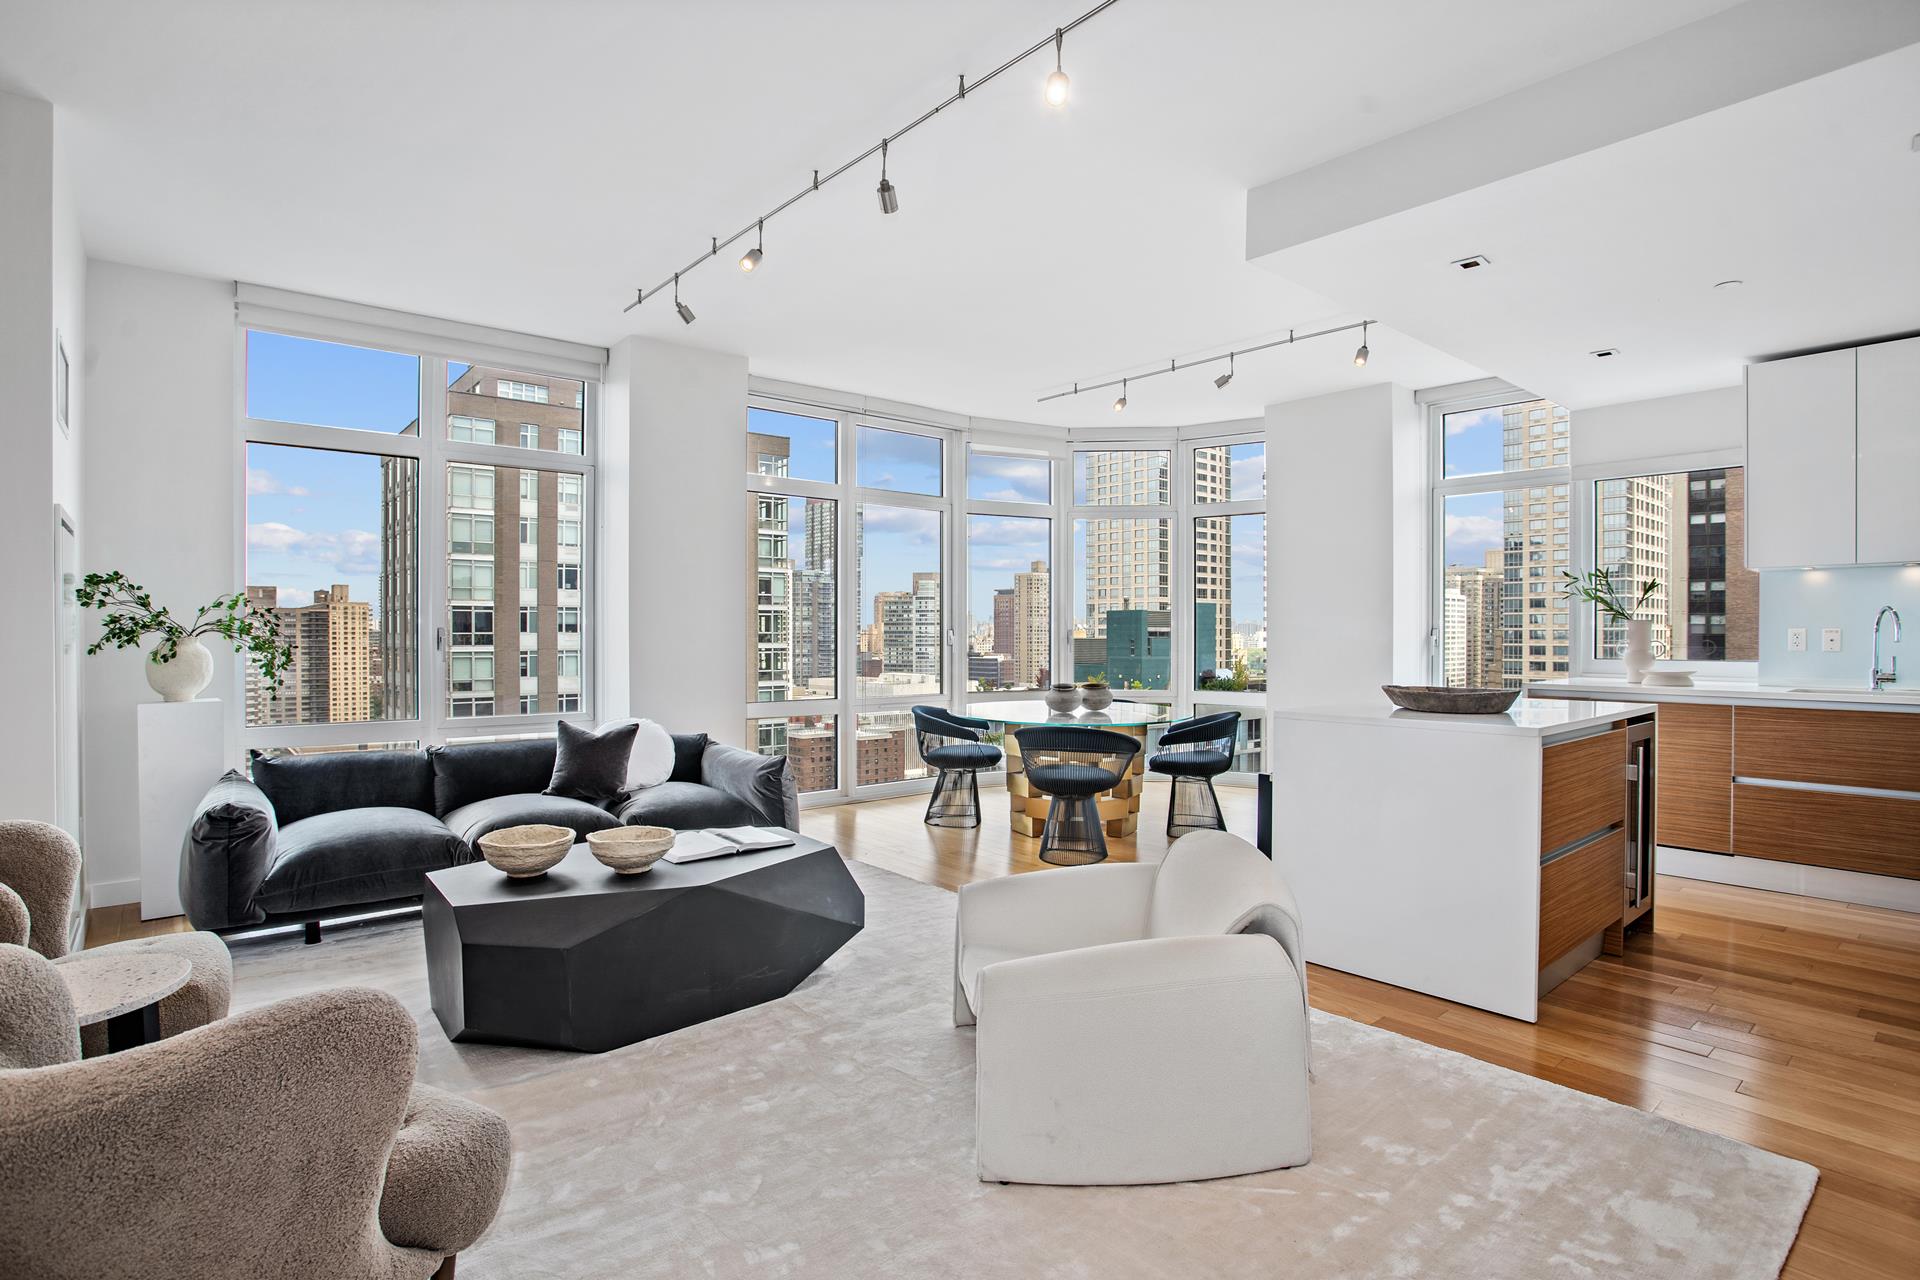 555 West 59th Street 25E, Lincoln Sq, Upper West Side, NYC - 2 Bedrooms  
2 Bathrooms  
4 Rooms - 